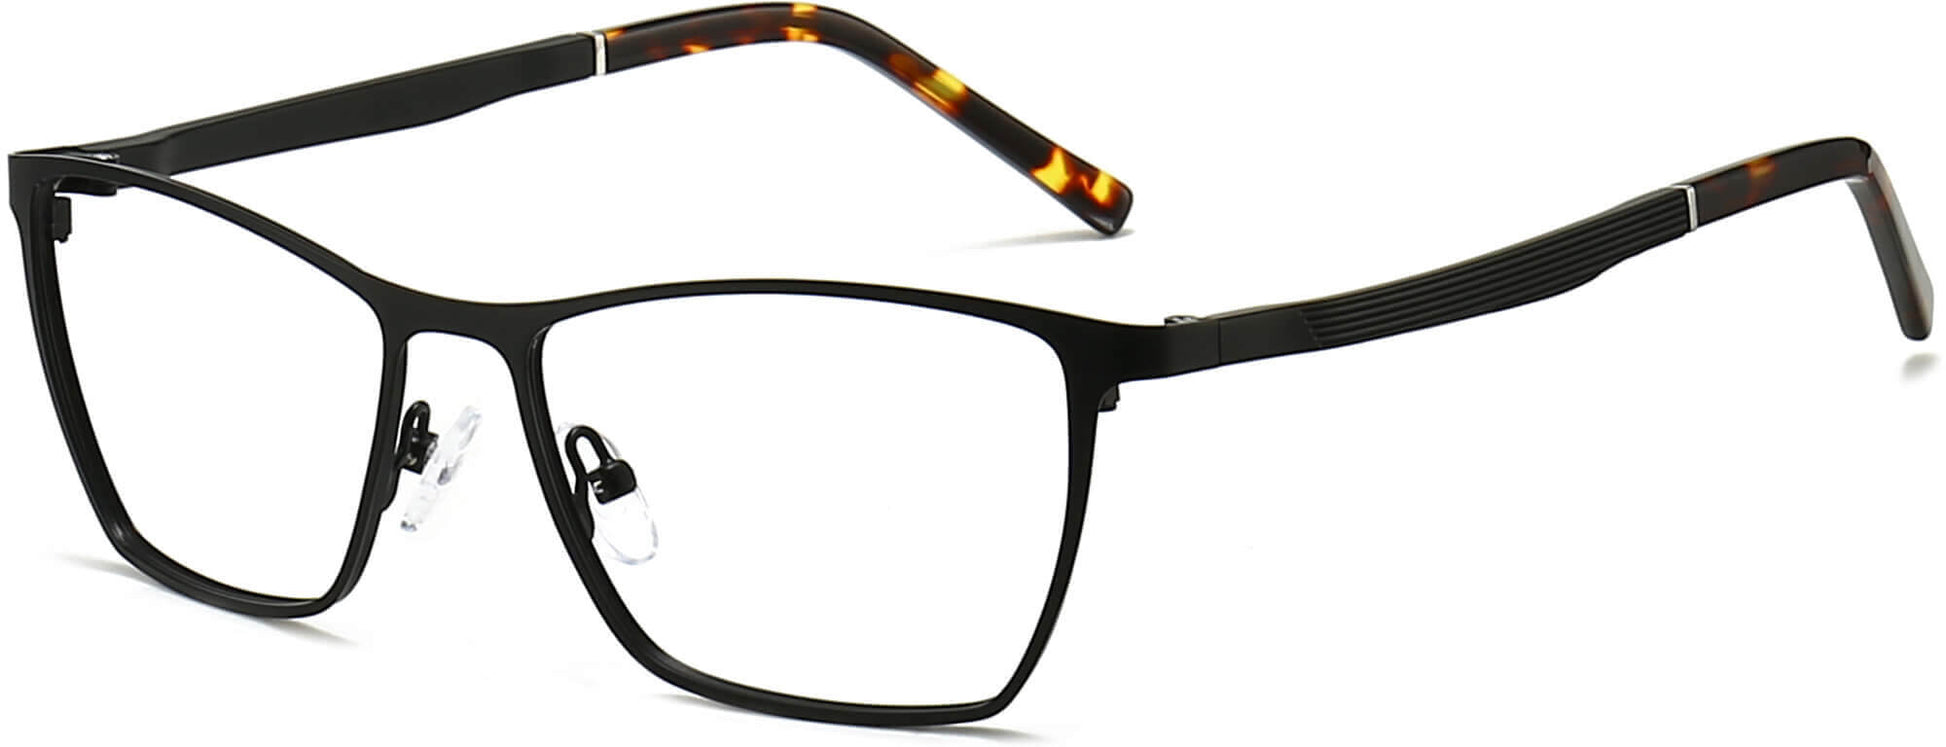 Delilah Cateye Black Eyeglasses from ANRRI, angle view